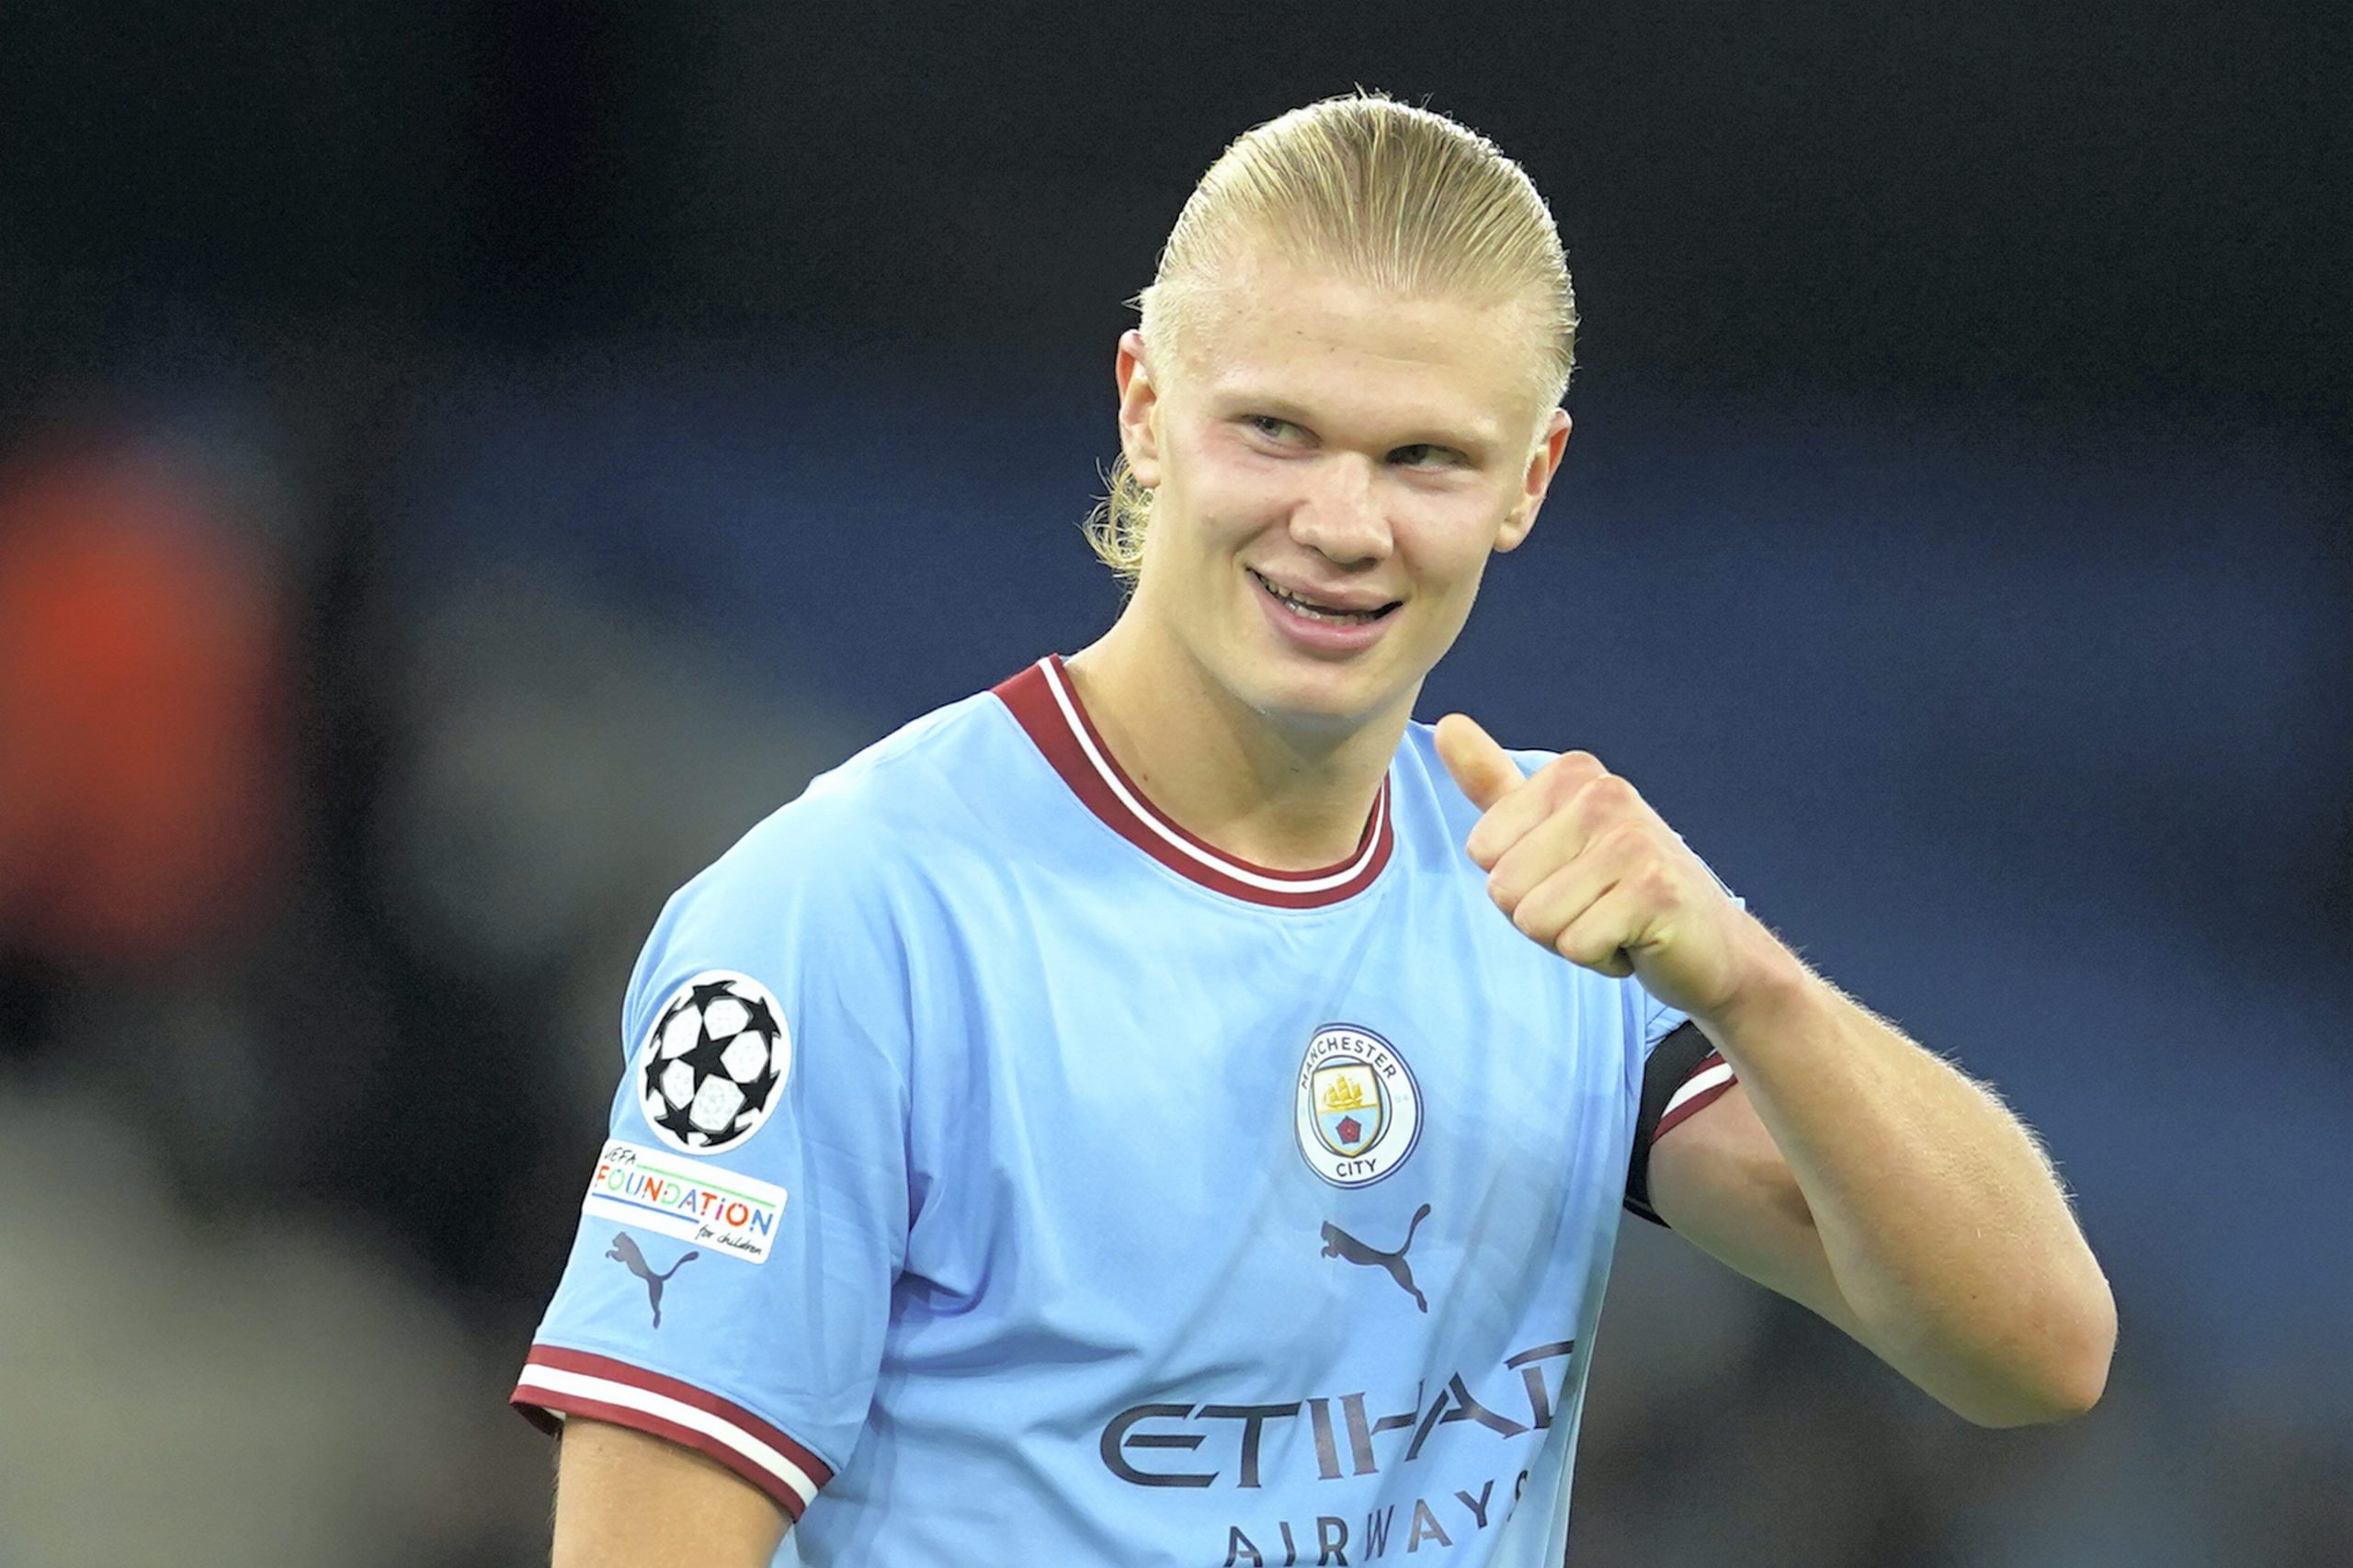 Erling Haaland likely to become the first 1 billion pound footballer